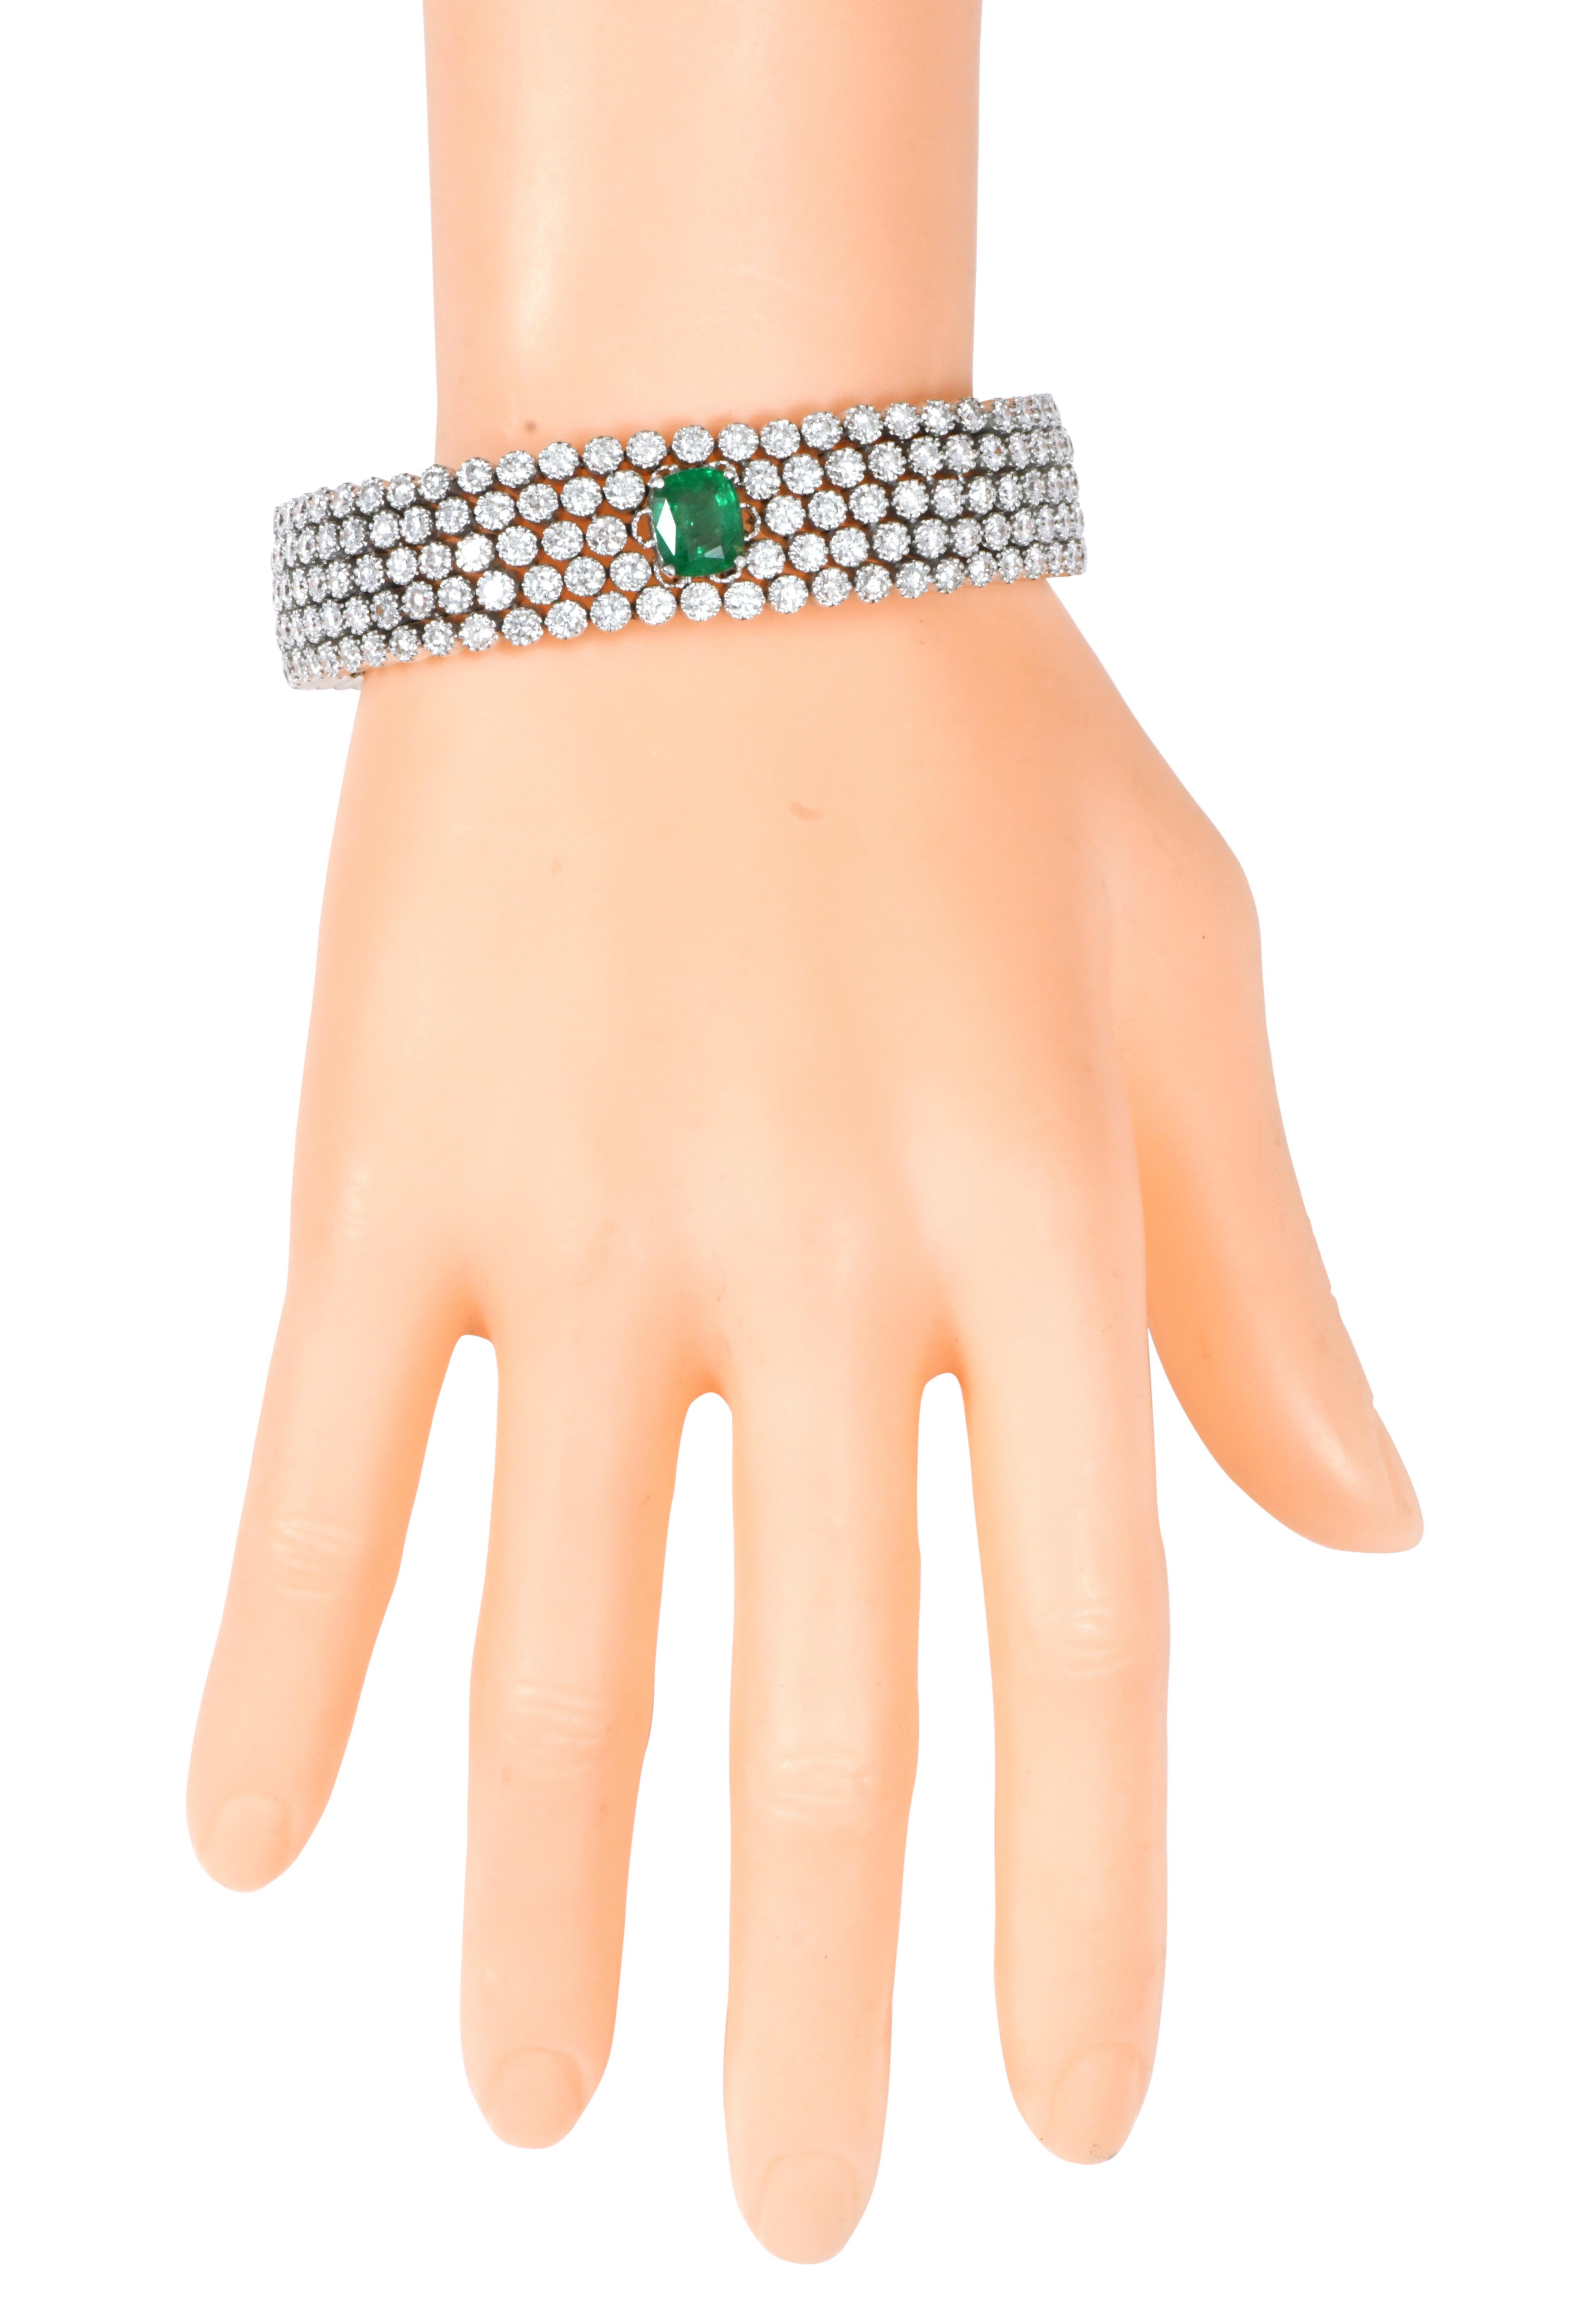 18 Karat White Gold 19.13 Carat Diamond and Emerald Contemporary Bracelet

What if there was a magic spell to charm everything up and make you look like a gorgeous diva. Well, worry no more as we have a very special piece of jewelry for you that